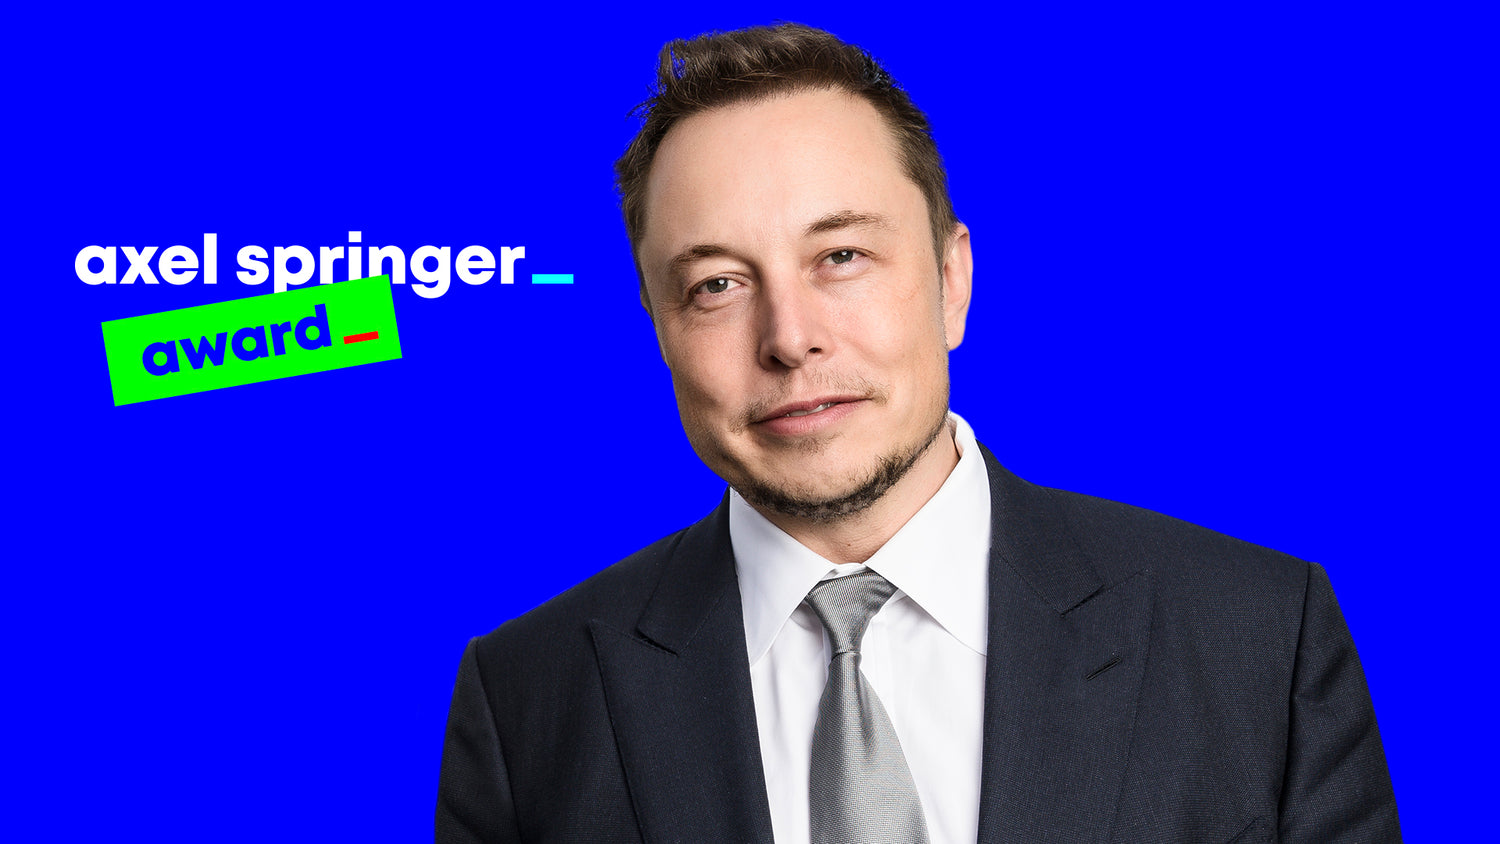 Tesla & SpaceX CEO Elon Musk Will Personally Receive The Axel Springer Award in Berlin